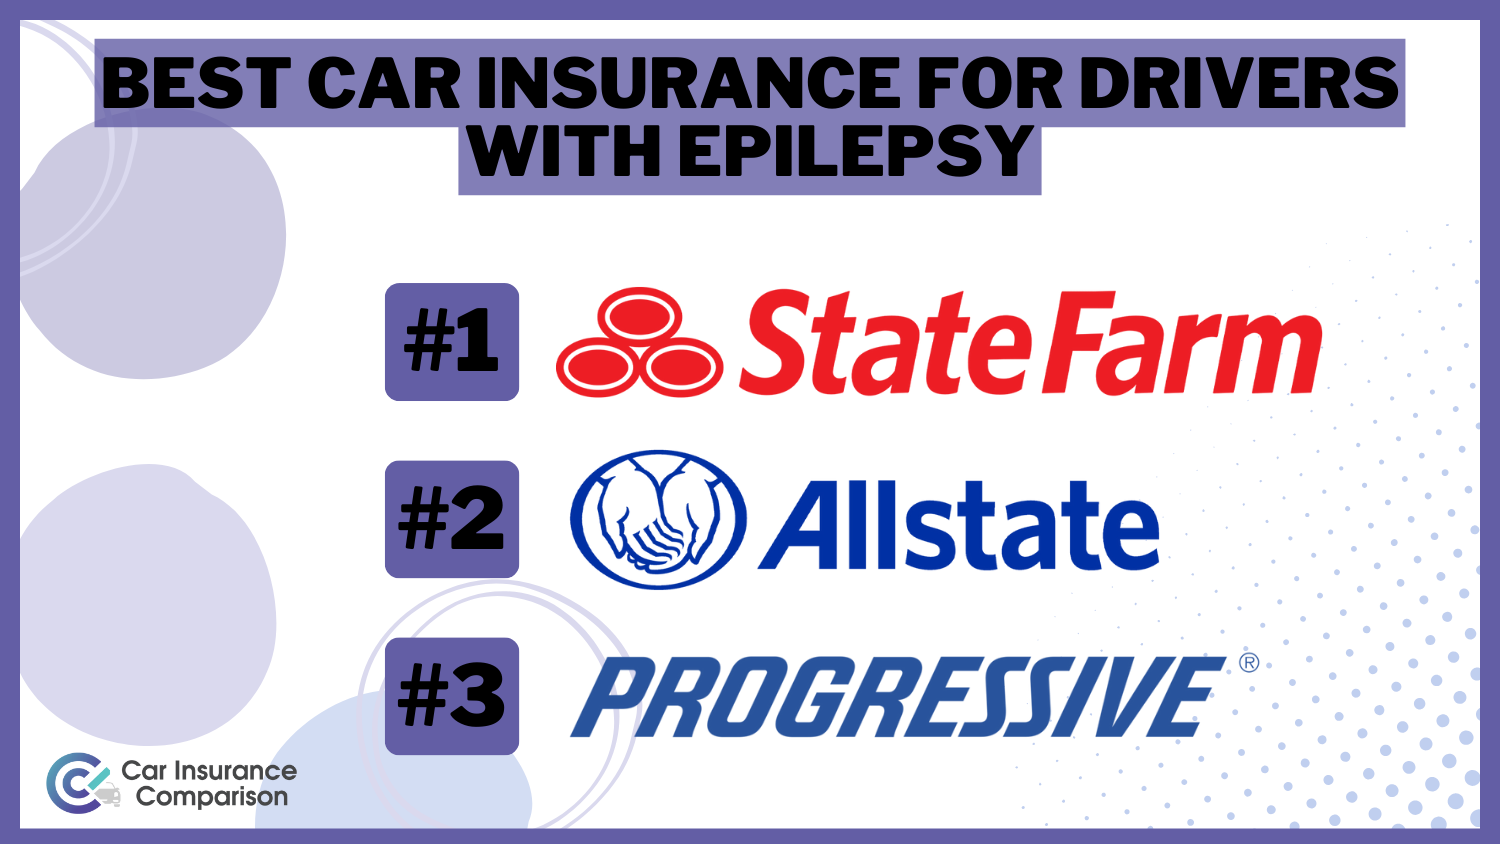 3 Best Car Insurance for Drivers With Epilepsy: State Farm, Allstate, and Progressive.